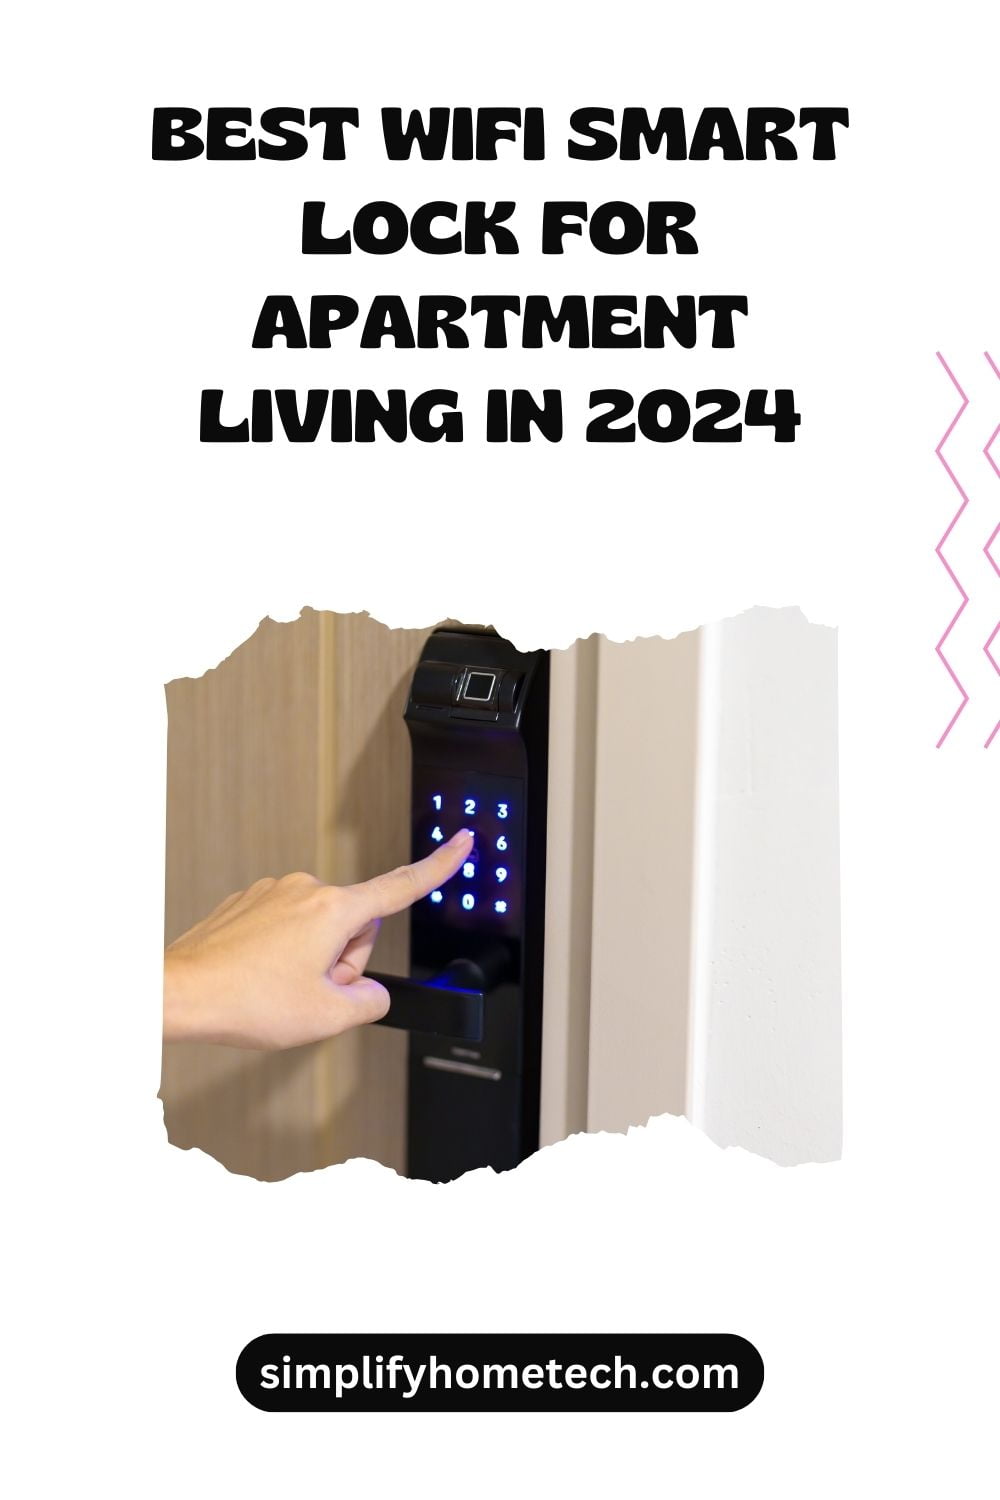 5 Best WiFi Smart Lock for Apartment Living in 2024